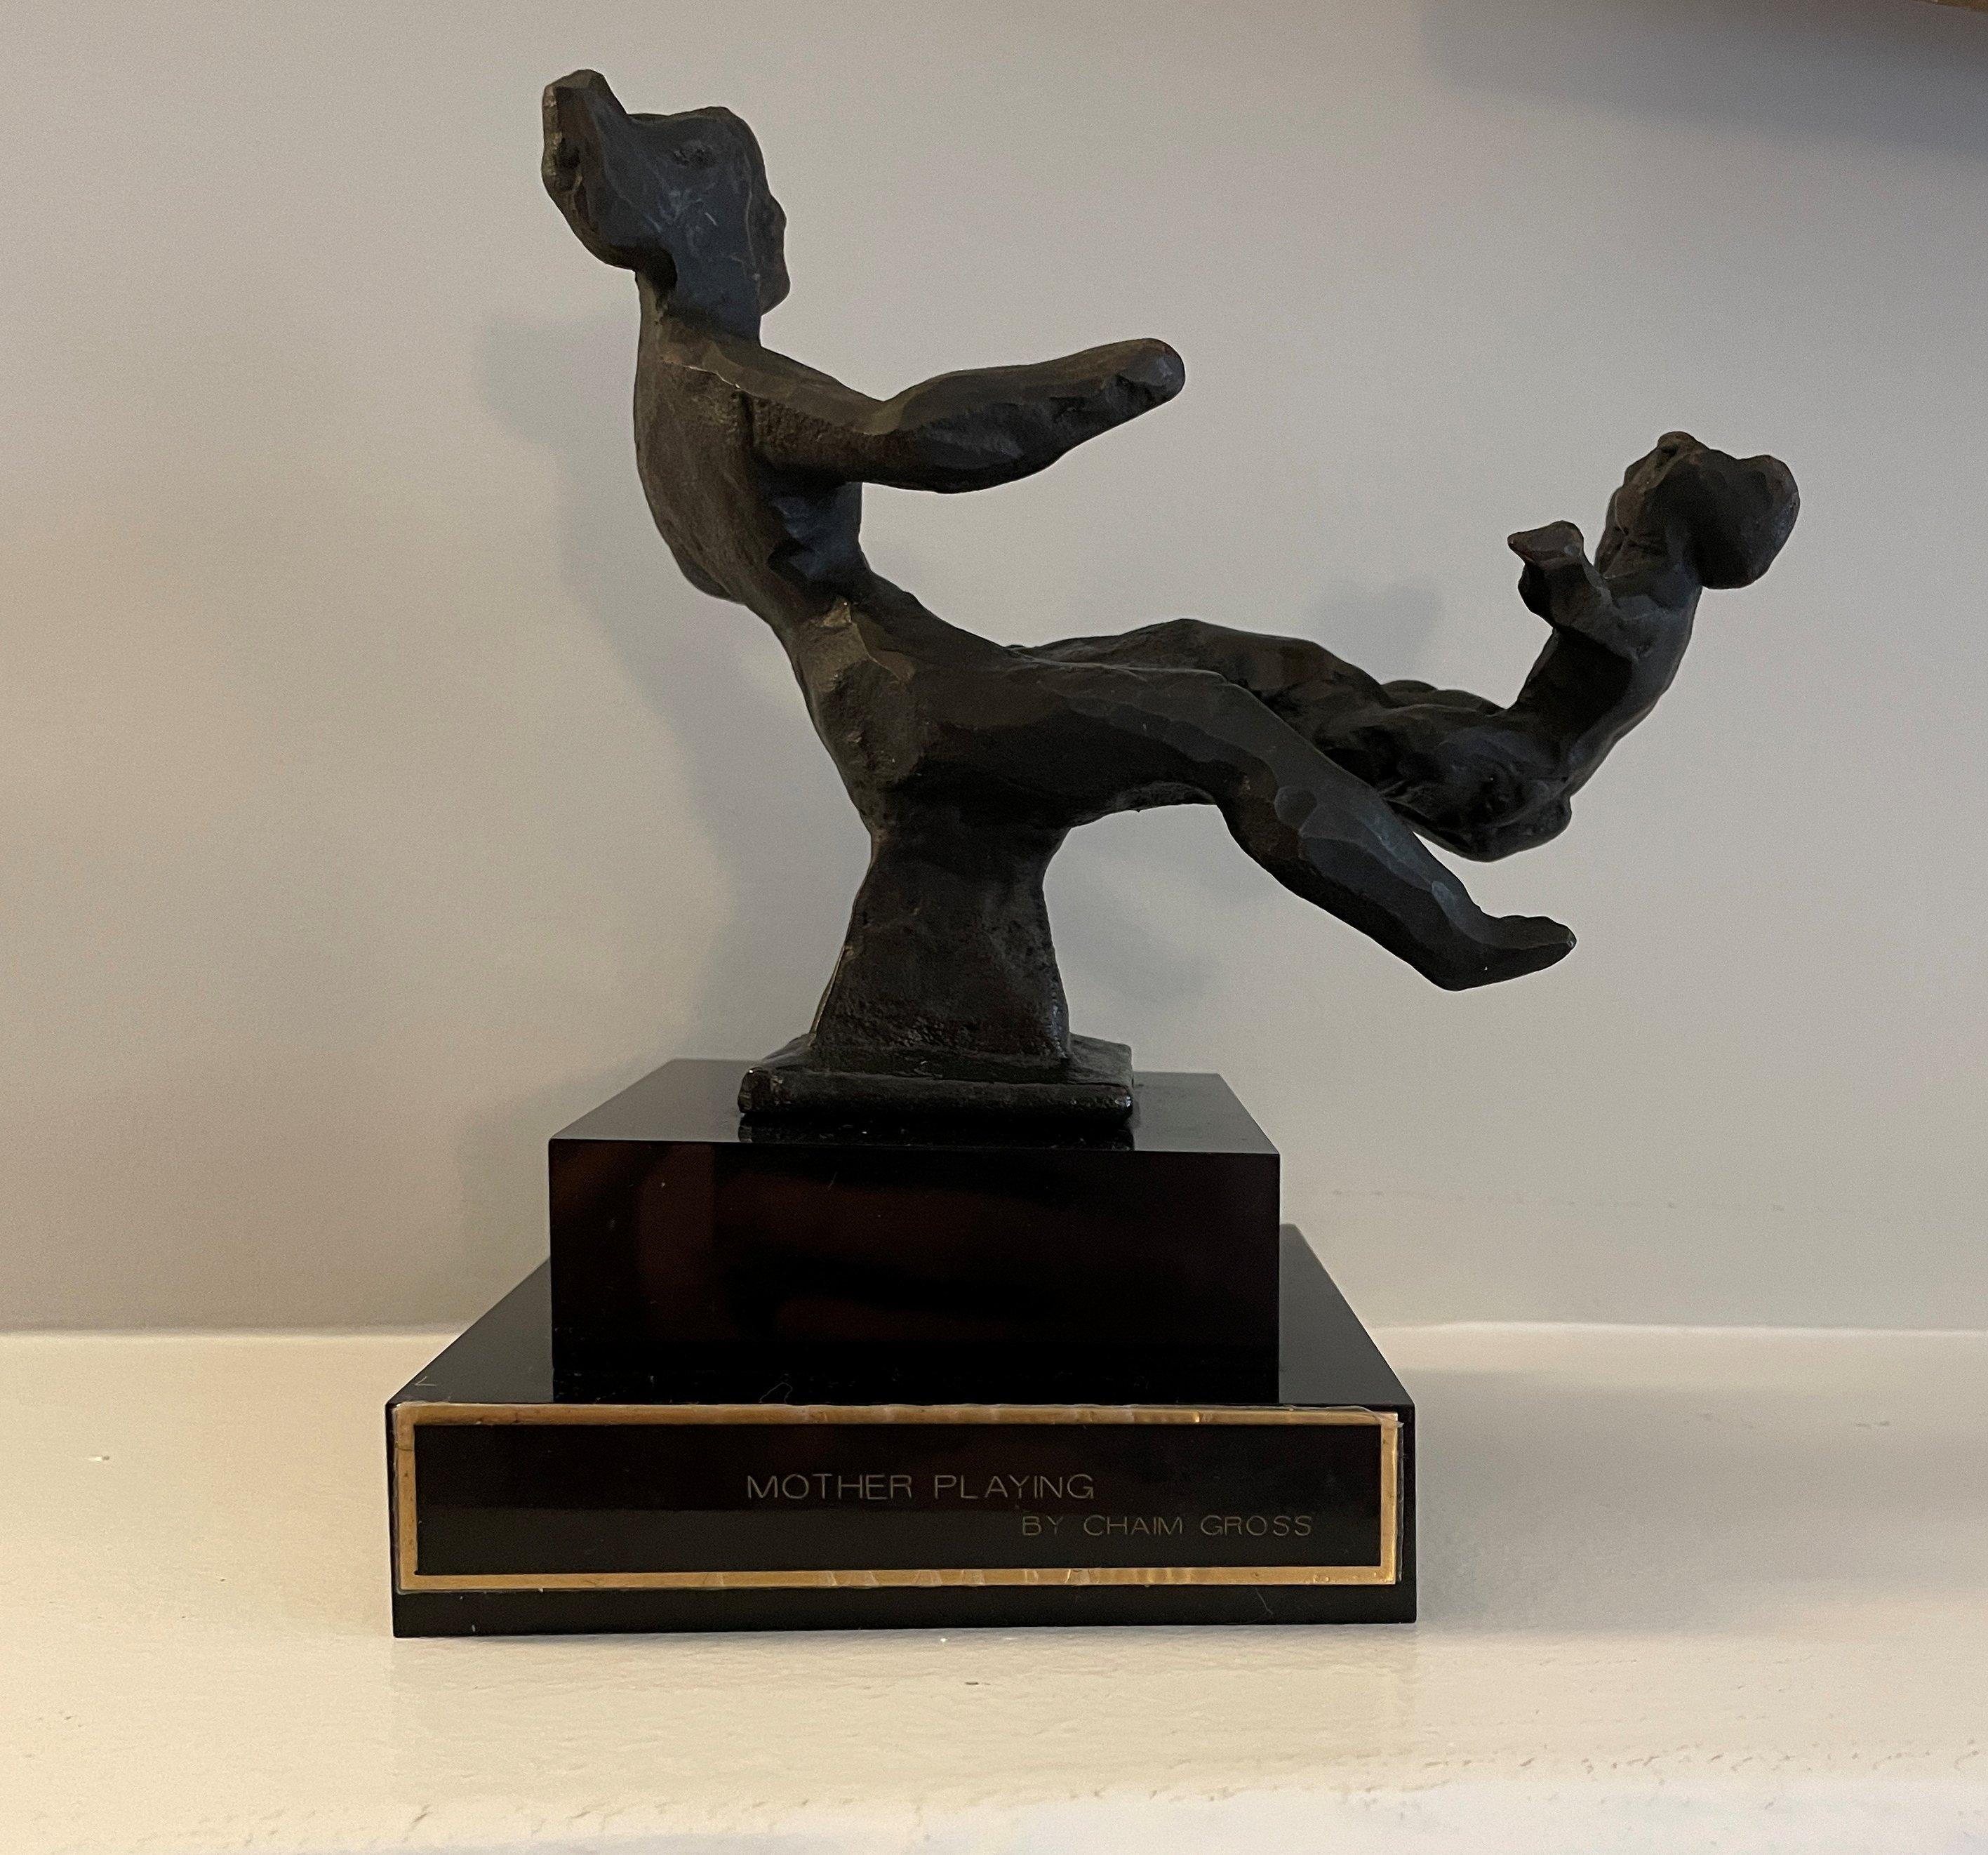 Chaim Gross (1904 - 1991)
Mother Playing
Bronze
5 x 6 x 4 inches
Edition 1/8
Signed and numbered

Provenance:
Louis H. Barnett, Fort Worth, Texas

A sculptor originally from Austria, Chaim Gross is best known for his lively, naturalistic, often